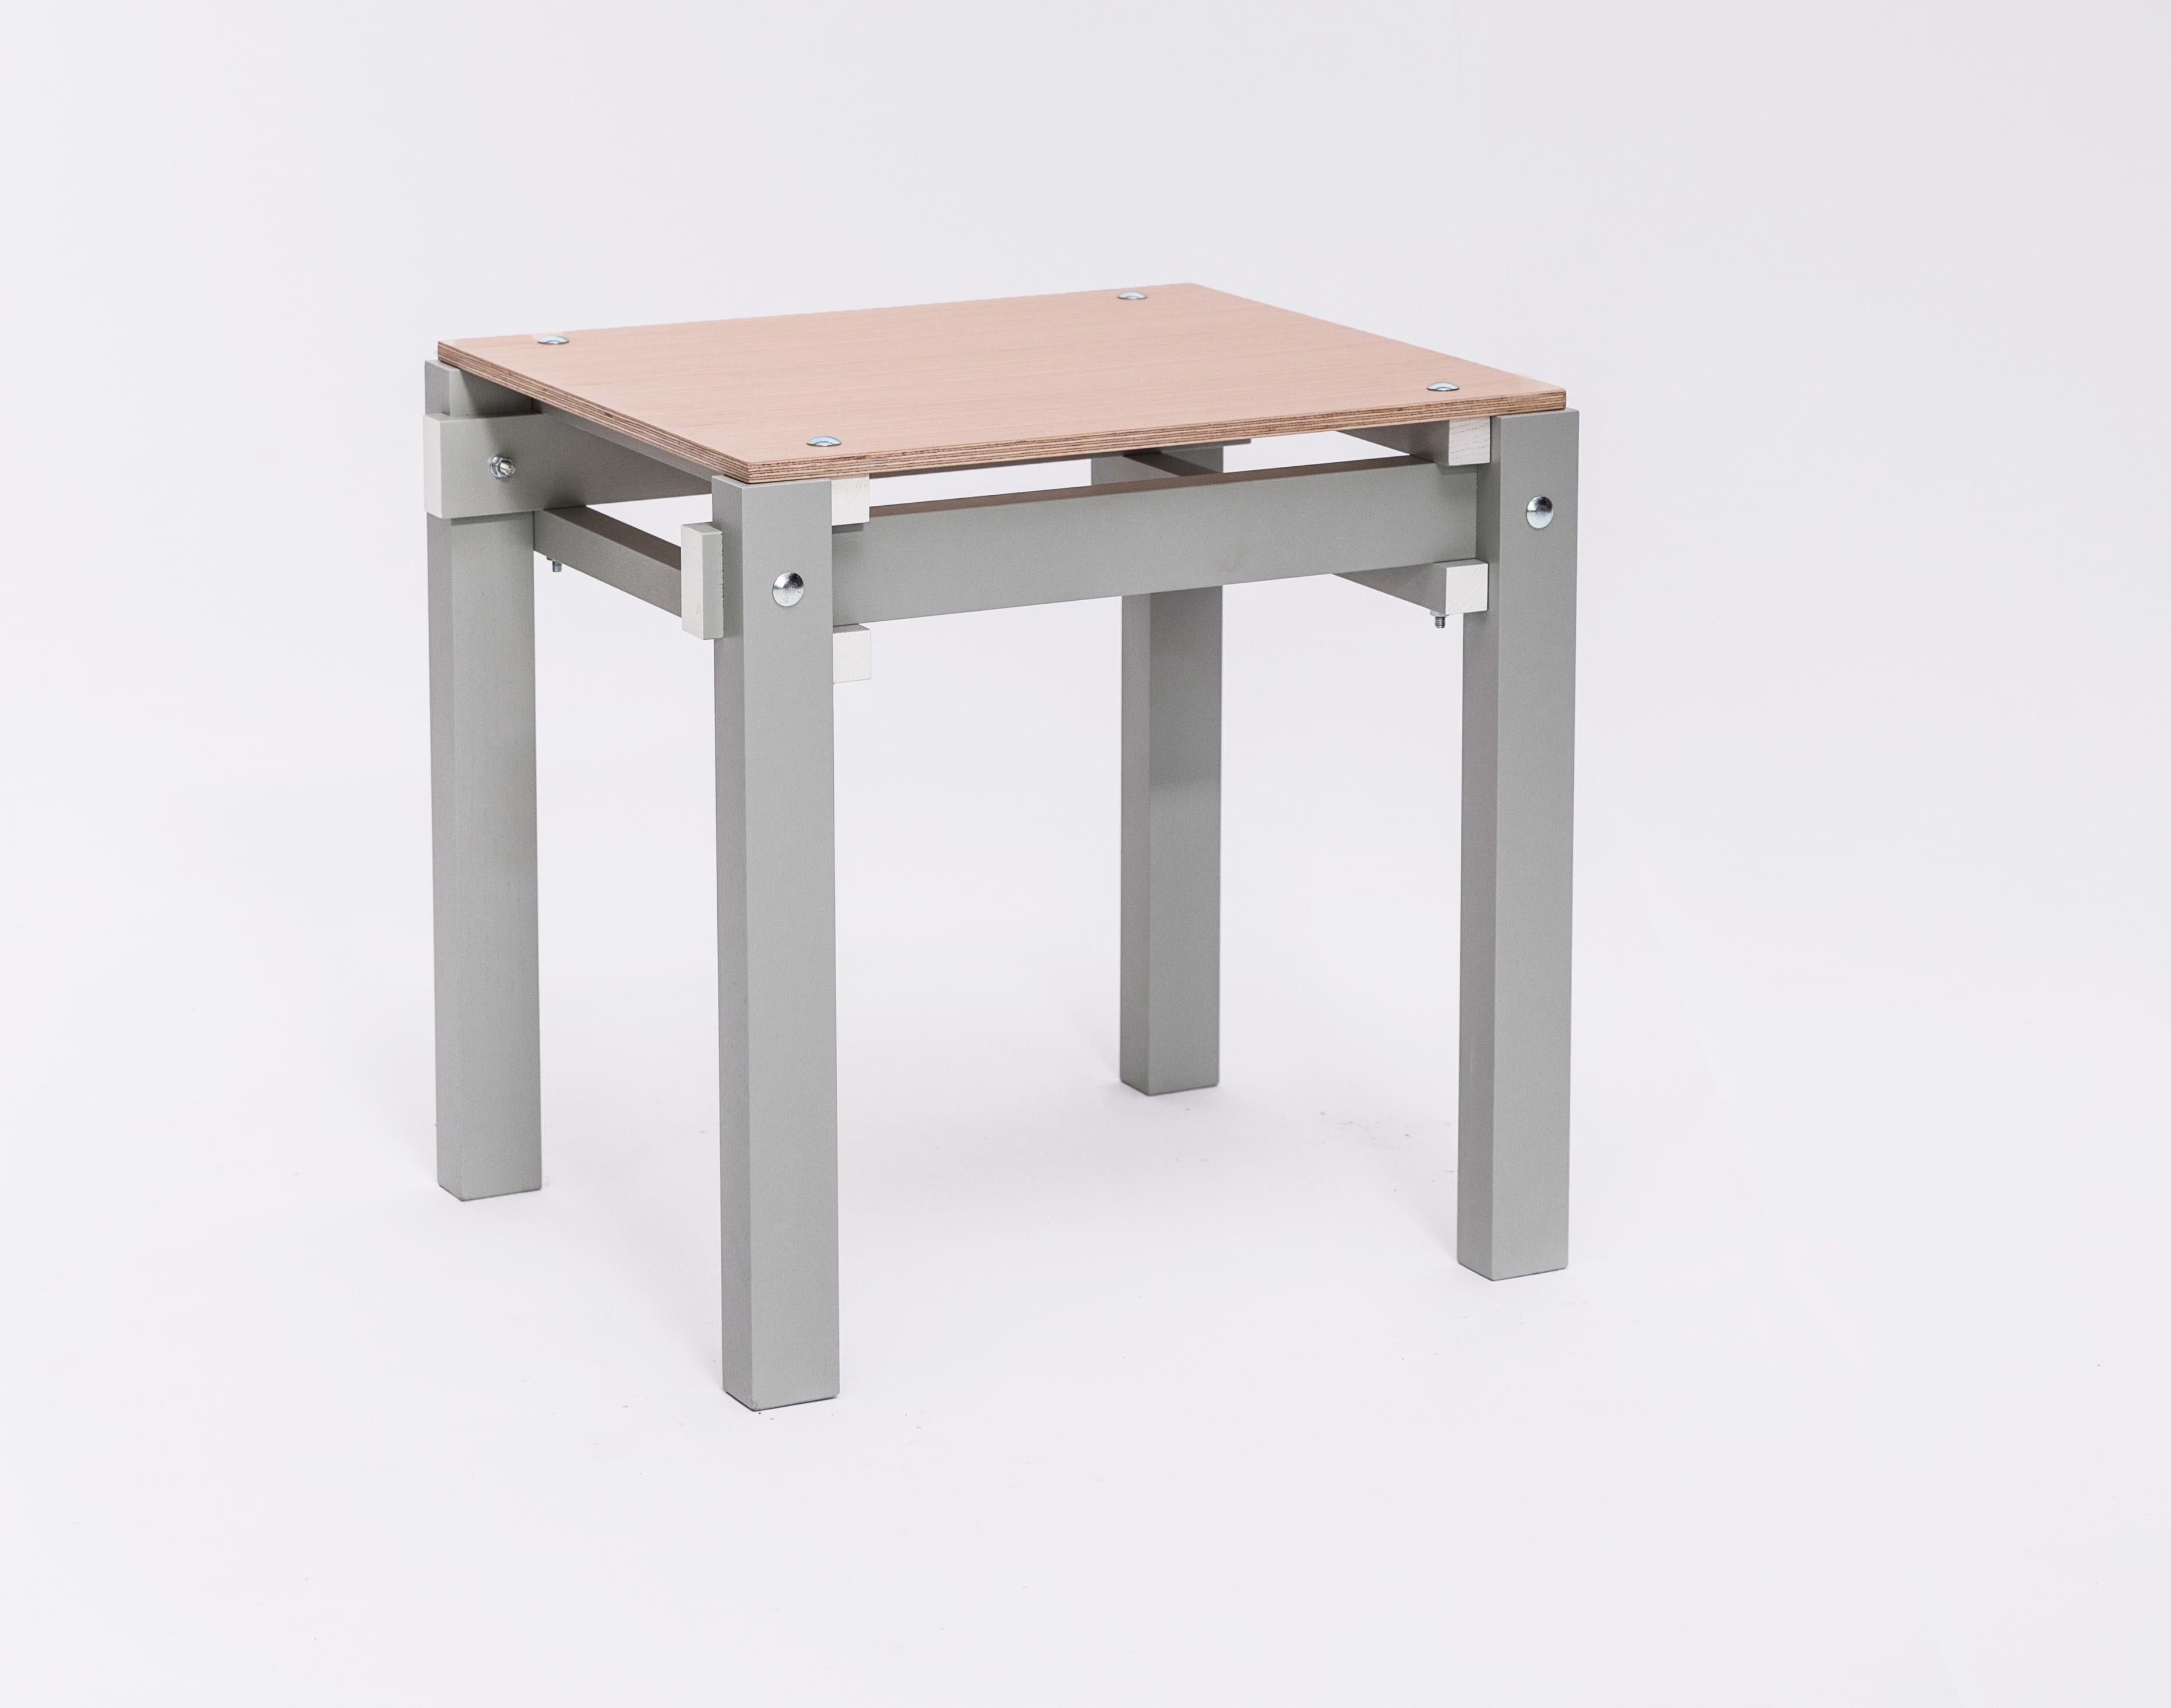 Stool / side table

The Rietveld Military furniture was designed in 1923 by Gerrit Rietveld for a Catholic Military Home in Utrecht, the Netherlands. The Military series was the first to use nuts and bolts instead of wooden dowels. The military